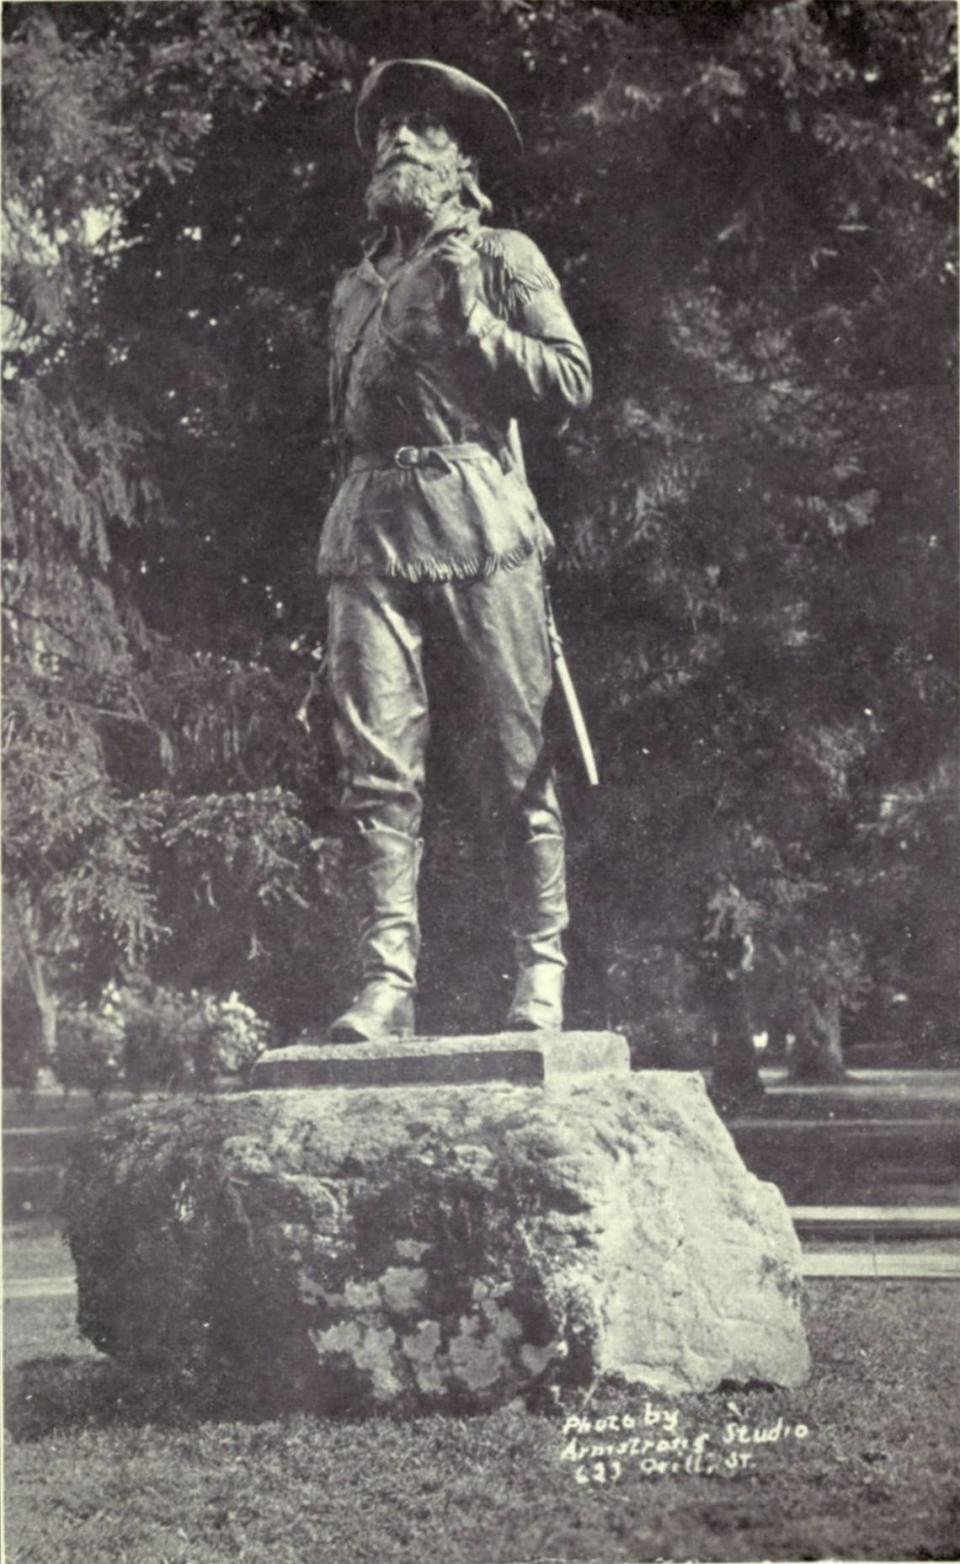 The Pioneer, A. Phimister Proctor, 1919